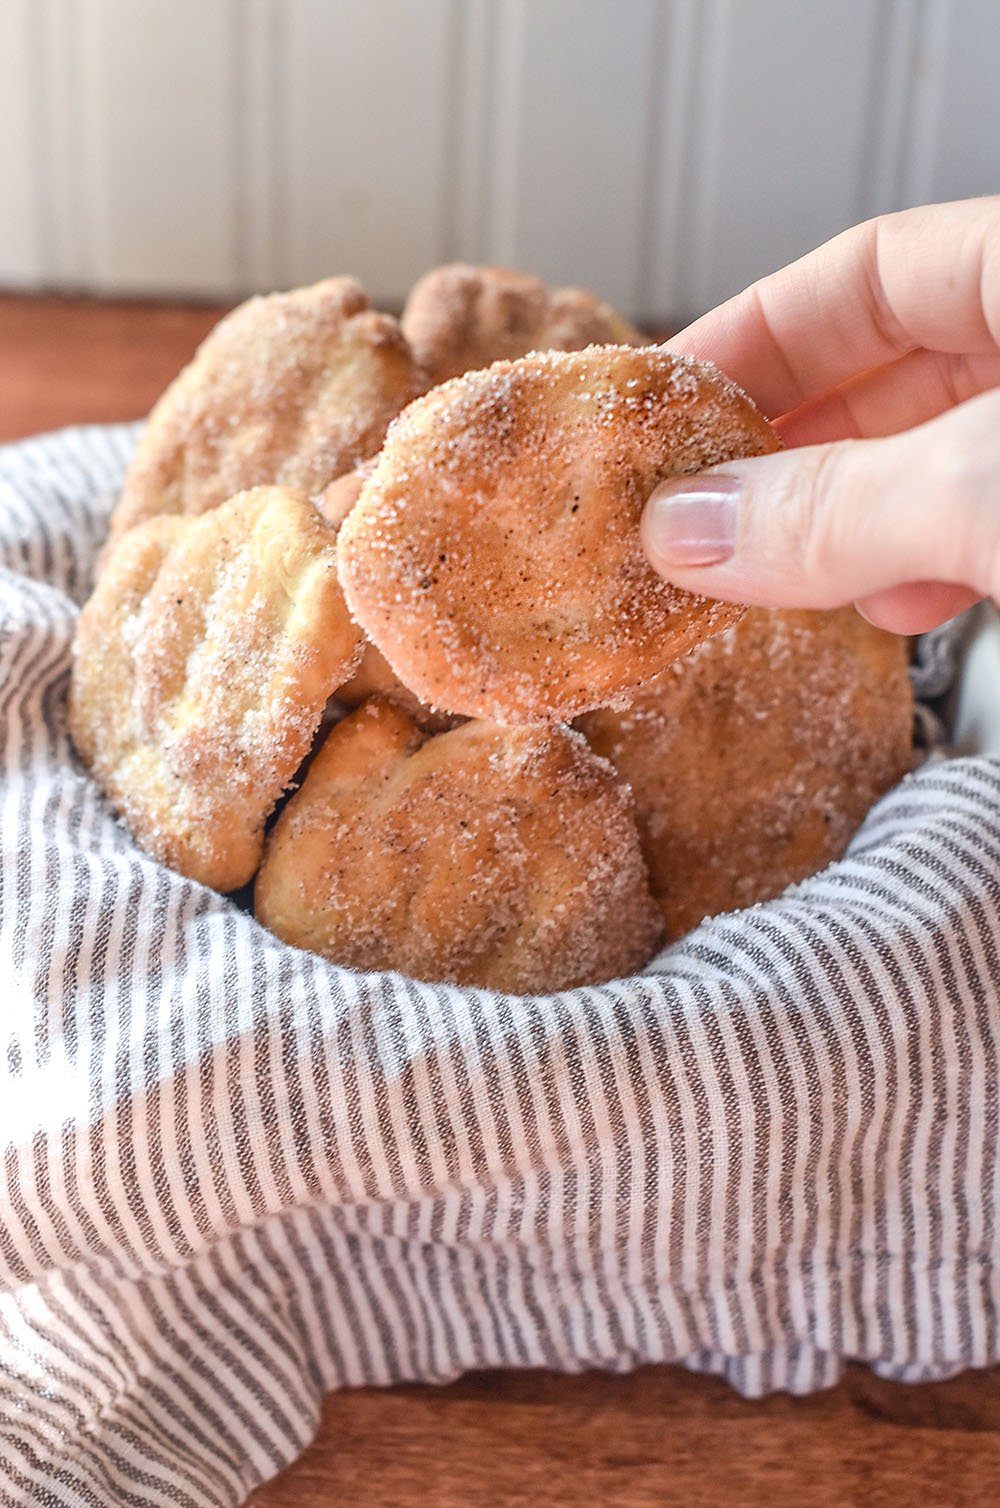 Bread dough fried in the air fryer and coated with cinnamon and sugar.